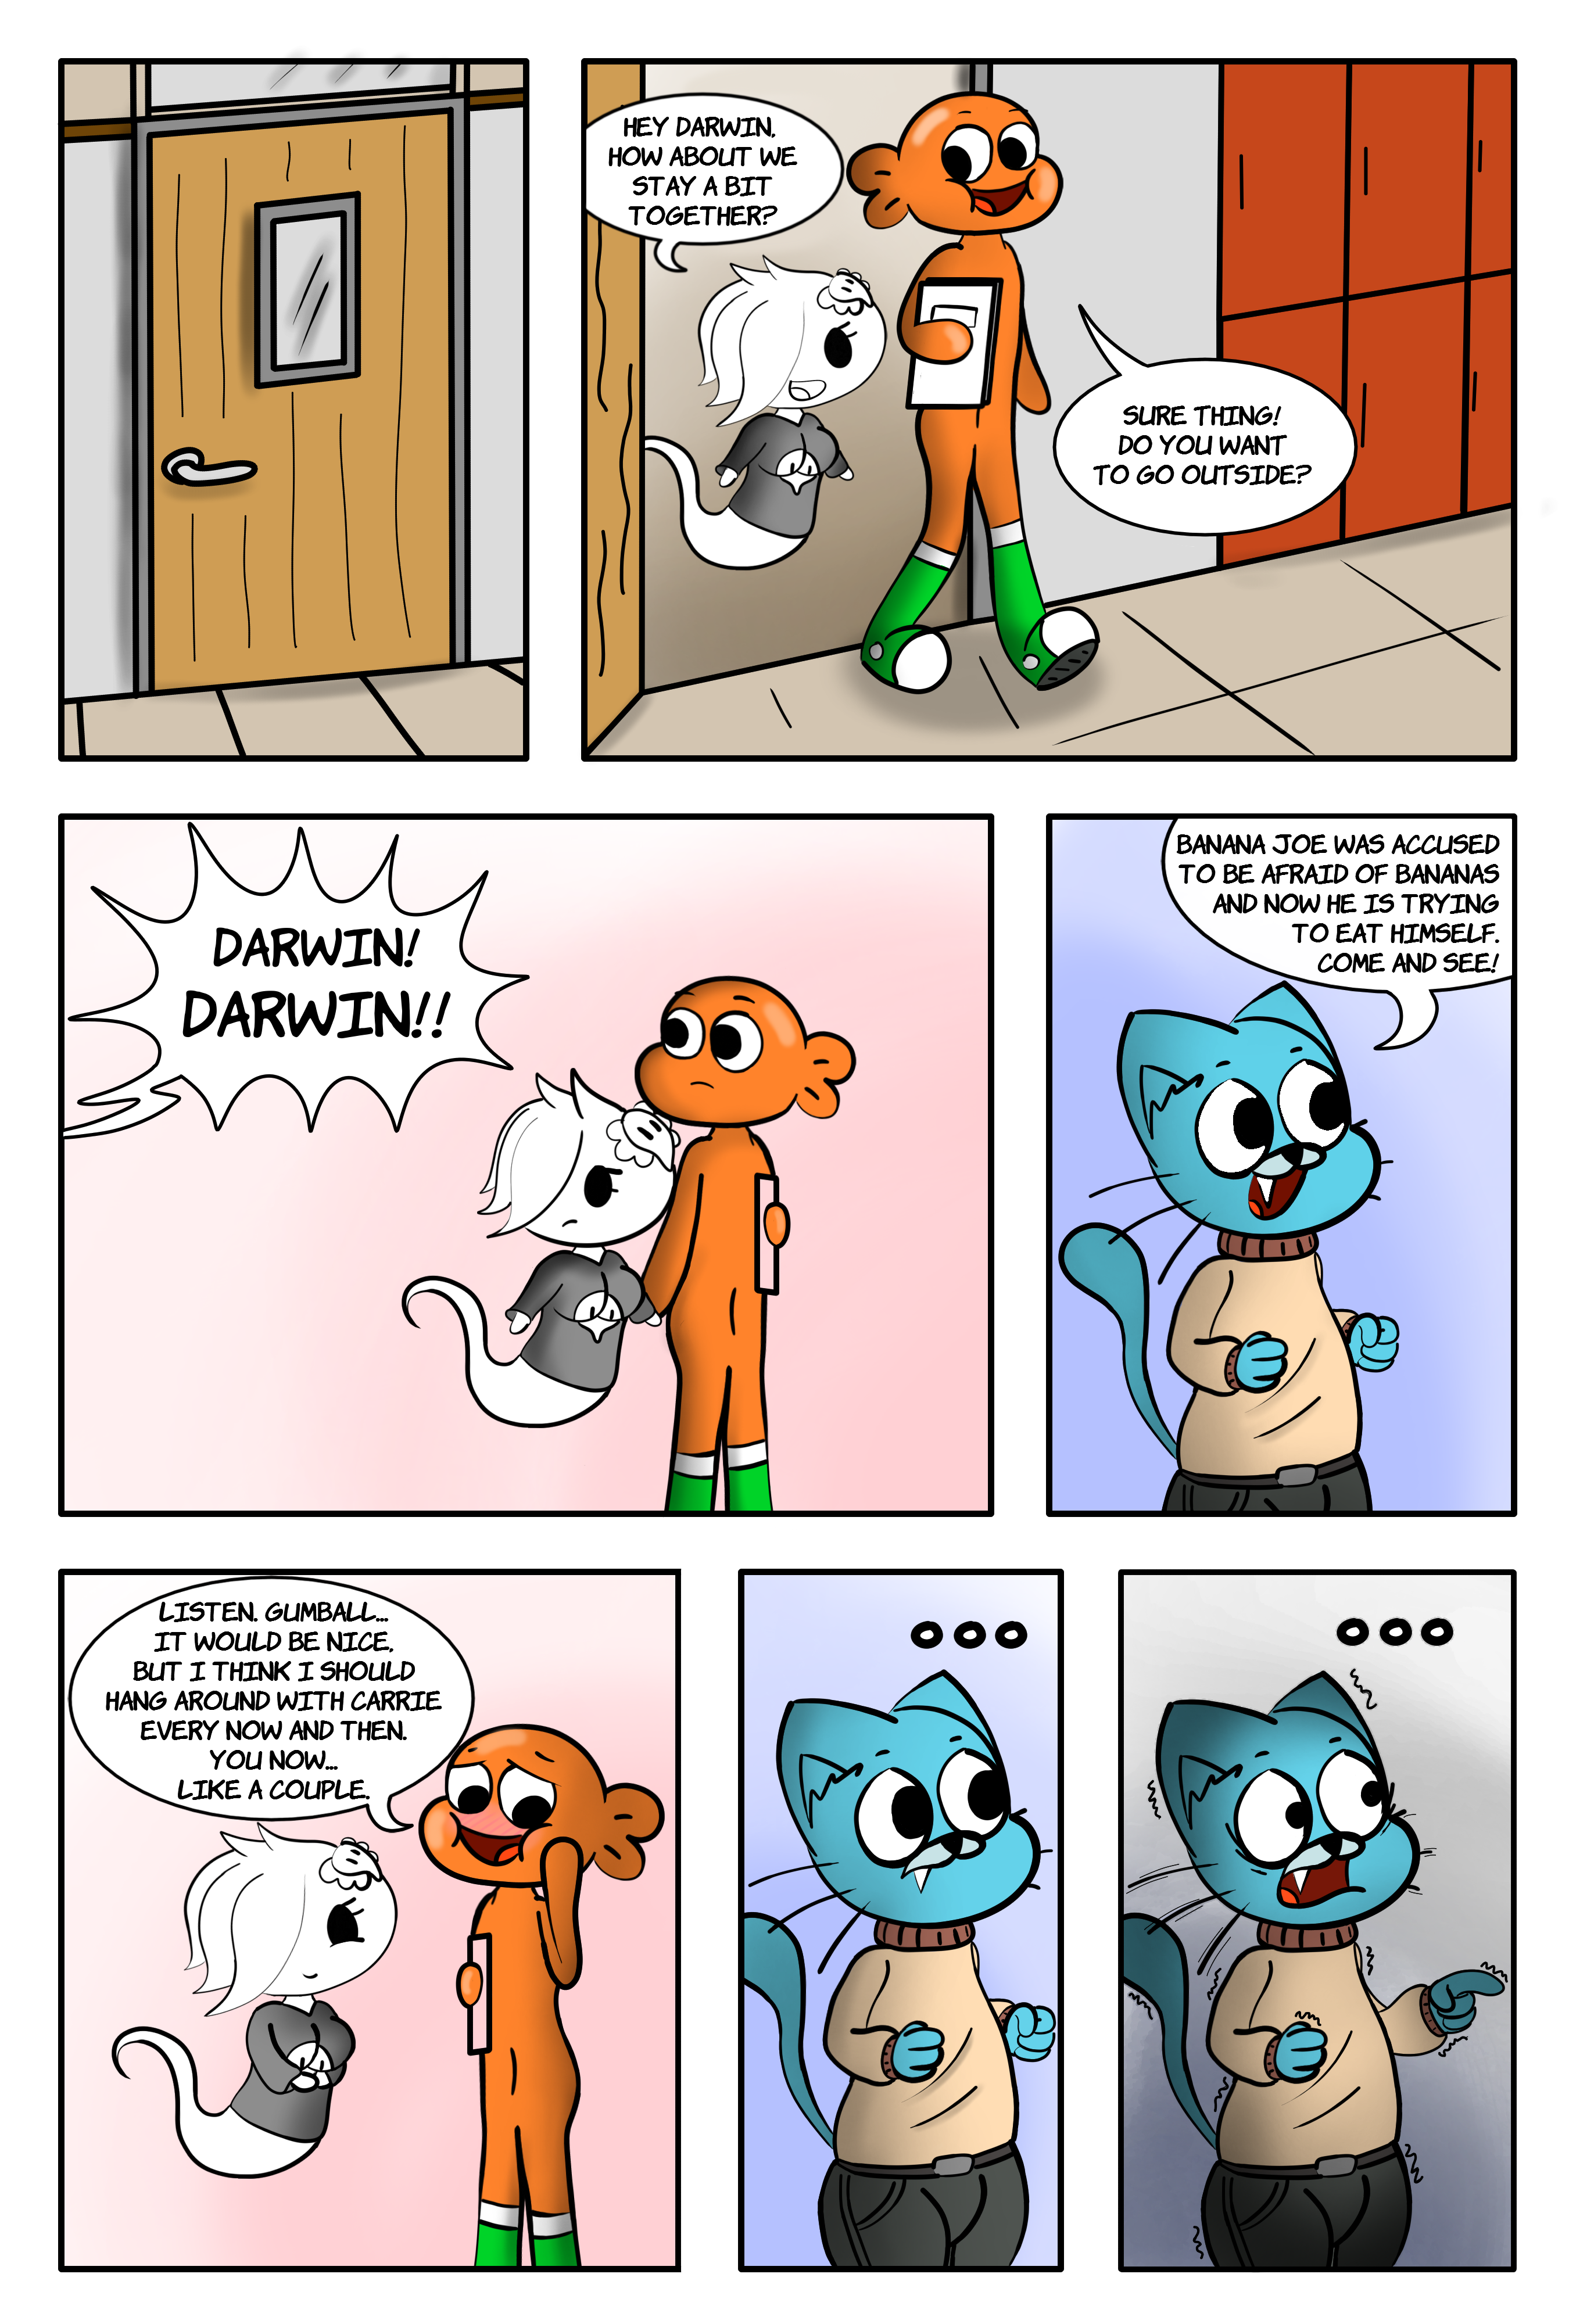 The Tainted World Of Gumball 1 porn comic